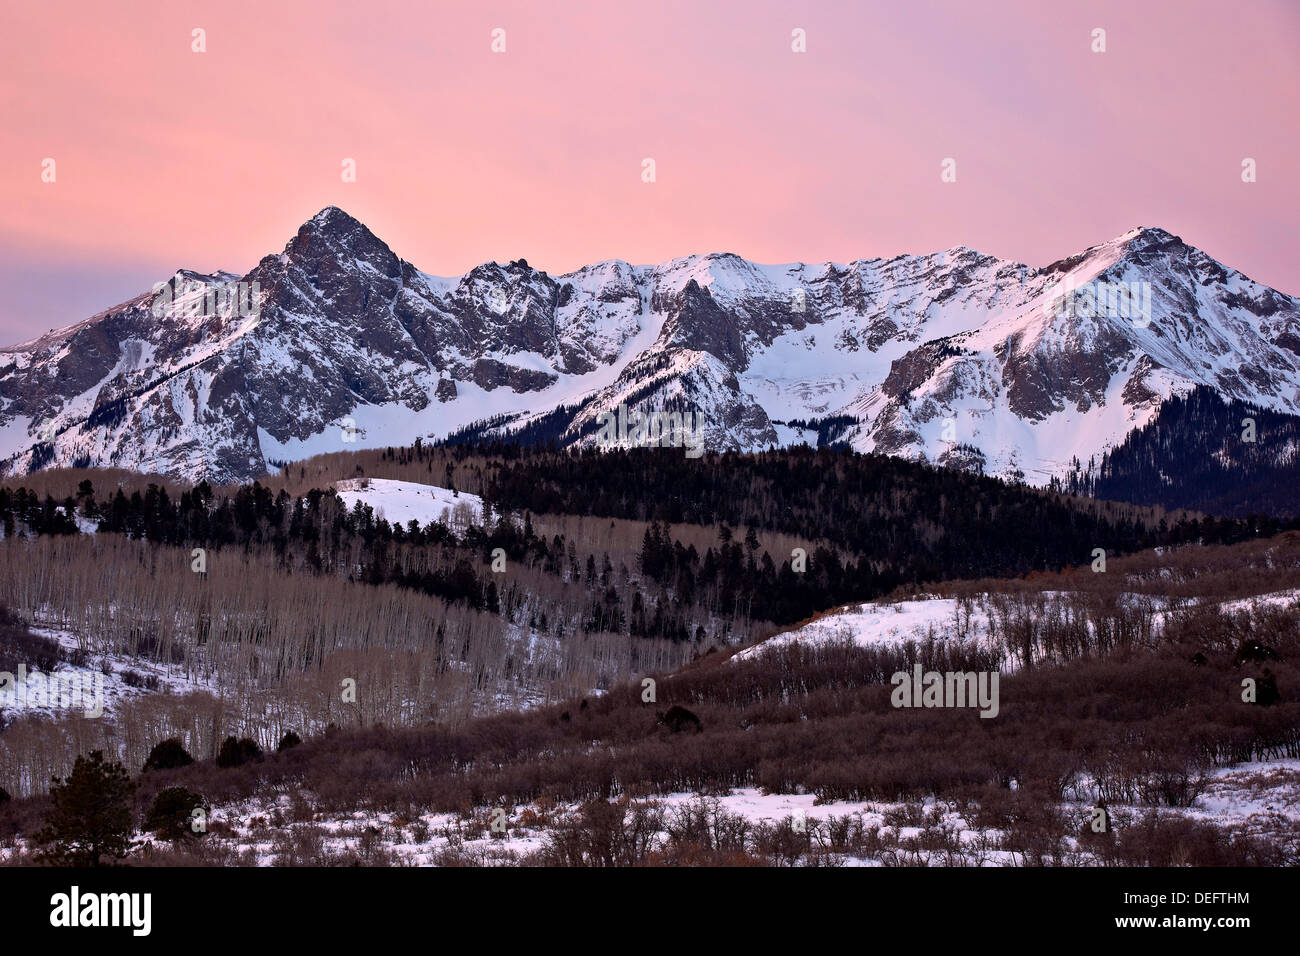 Mears Peak and the Sneffels Range in the winter, Uncompahgre National Forest, Colorado, United States of America, North America Stock Photo